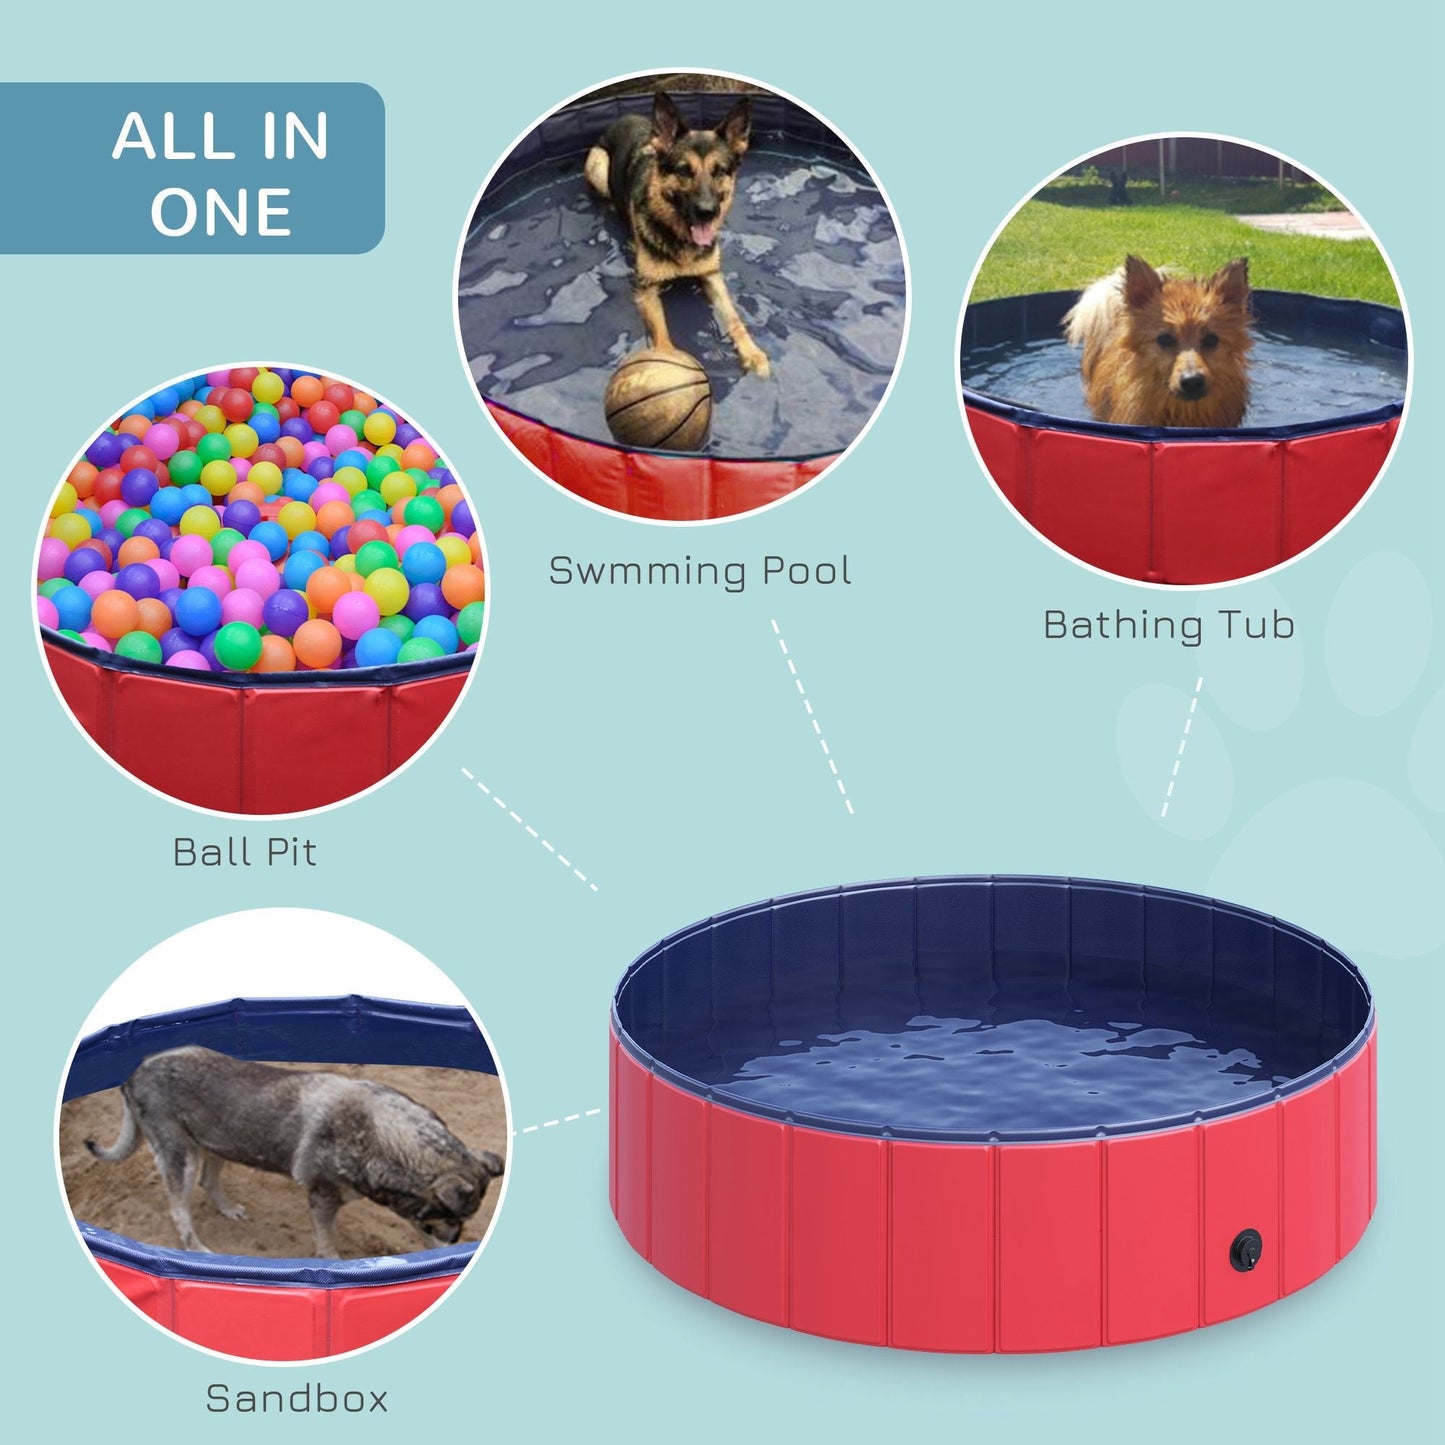 Folding Dog Pool Portable Pet Kiddie Swimming Pool, Outdoor/Indoor Puppy Bath Tub with Nonslip Bottom for Dogs &; Cats, (Φ47", Red) at Gallery Canada